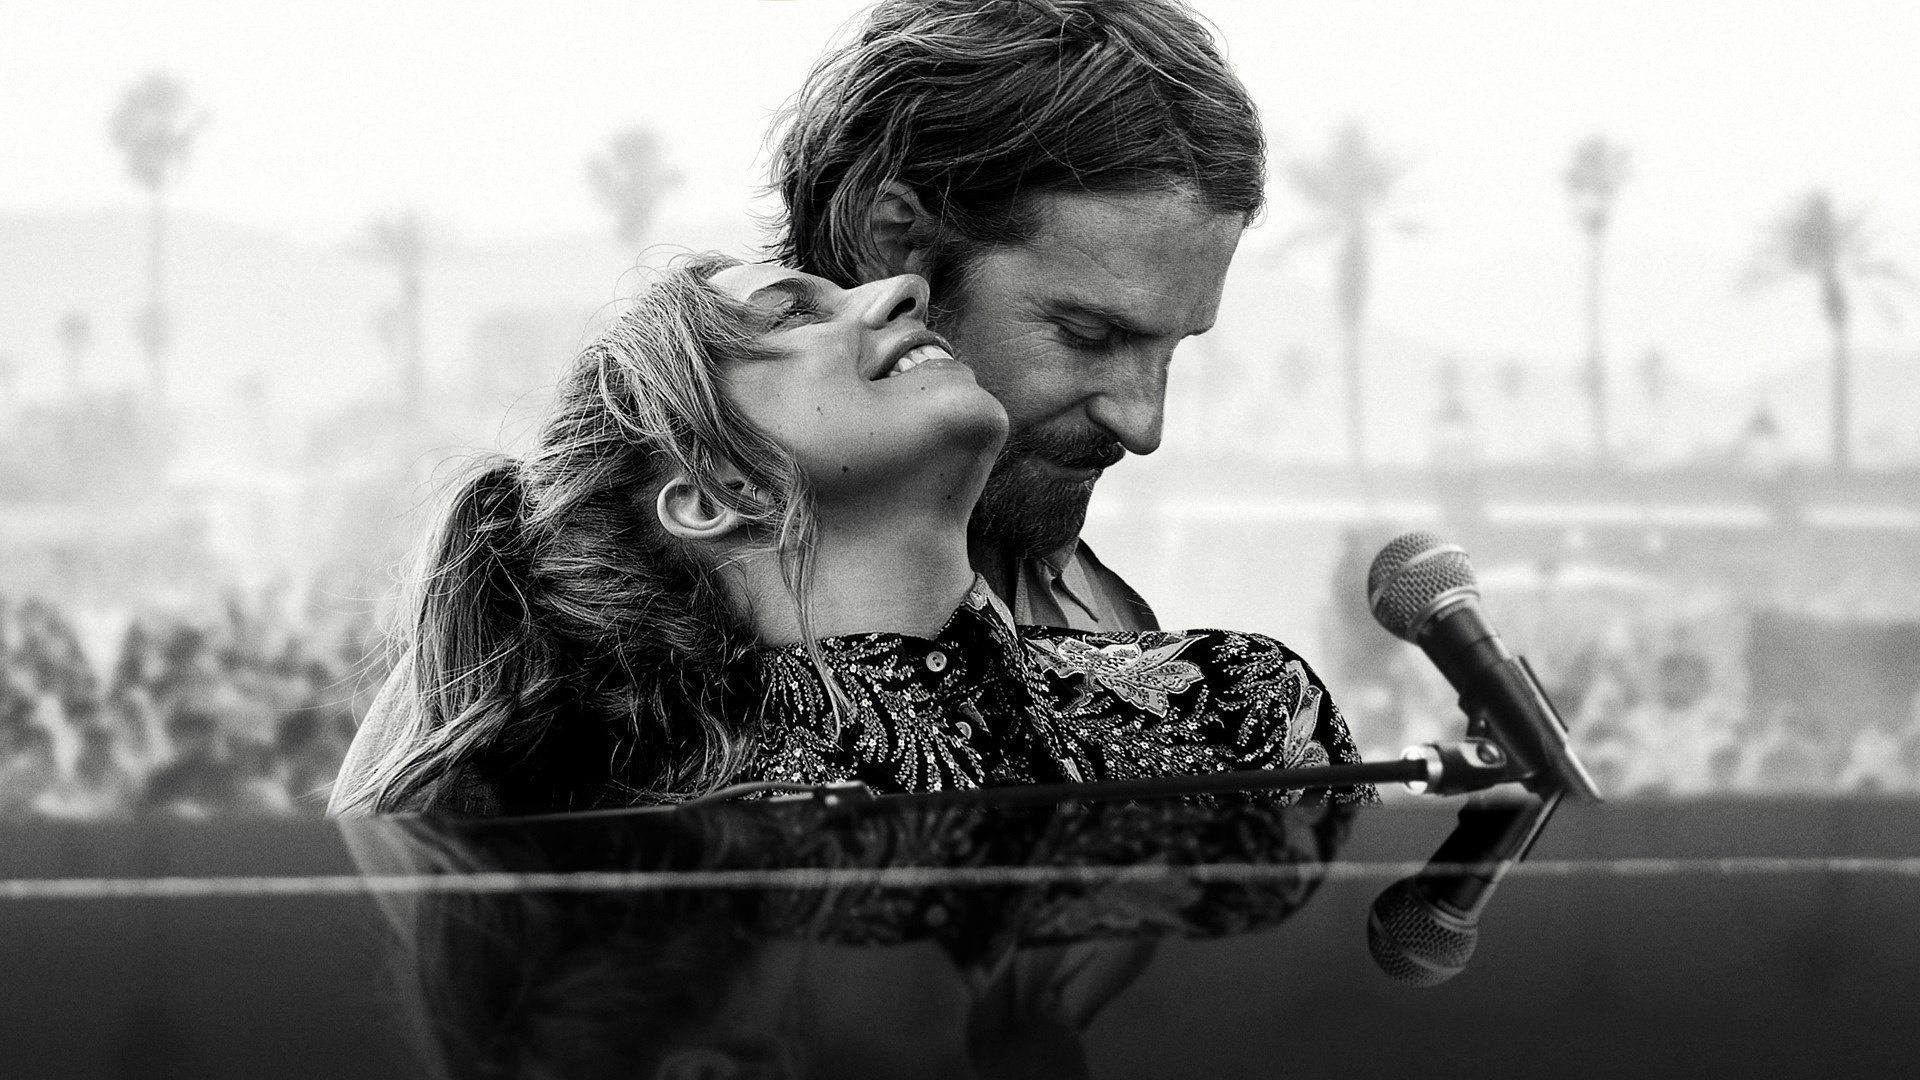 A Star Is Born: The fourth filmed version of the story, after the original 1937 romantic drama and its 1954 and 1976 adaptations. 1920x1080 Full HD Wallpaper.